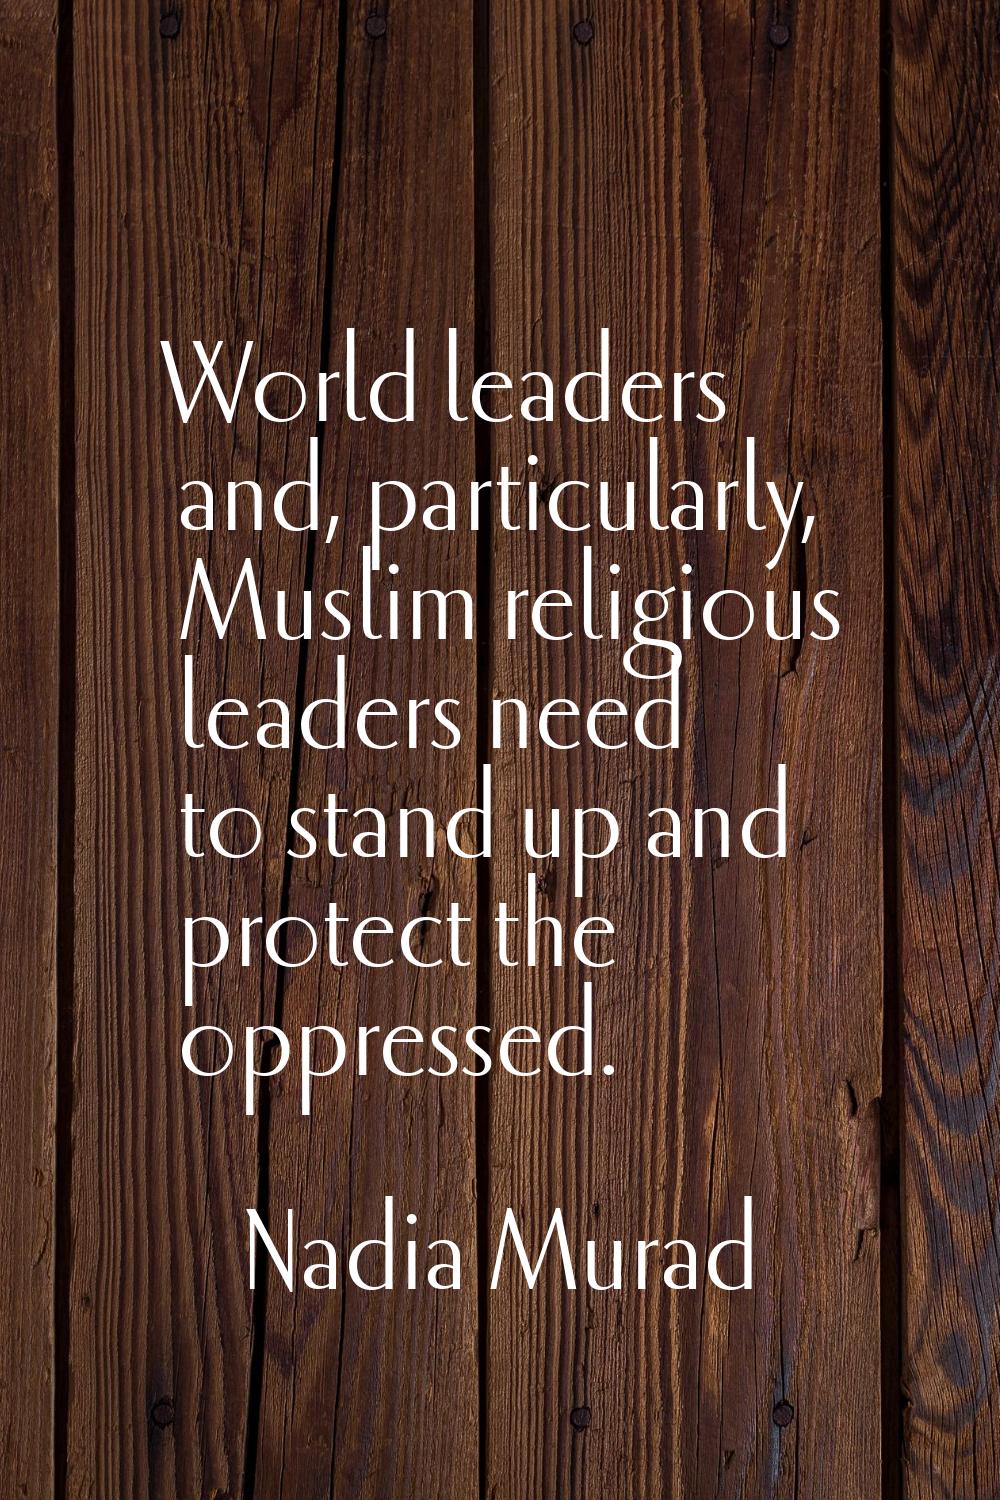 World leaders and, particularly, Muslim religious leaders need to stand up and protect the oppresse